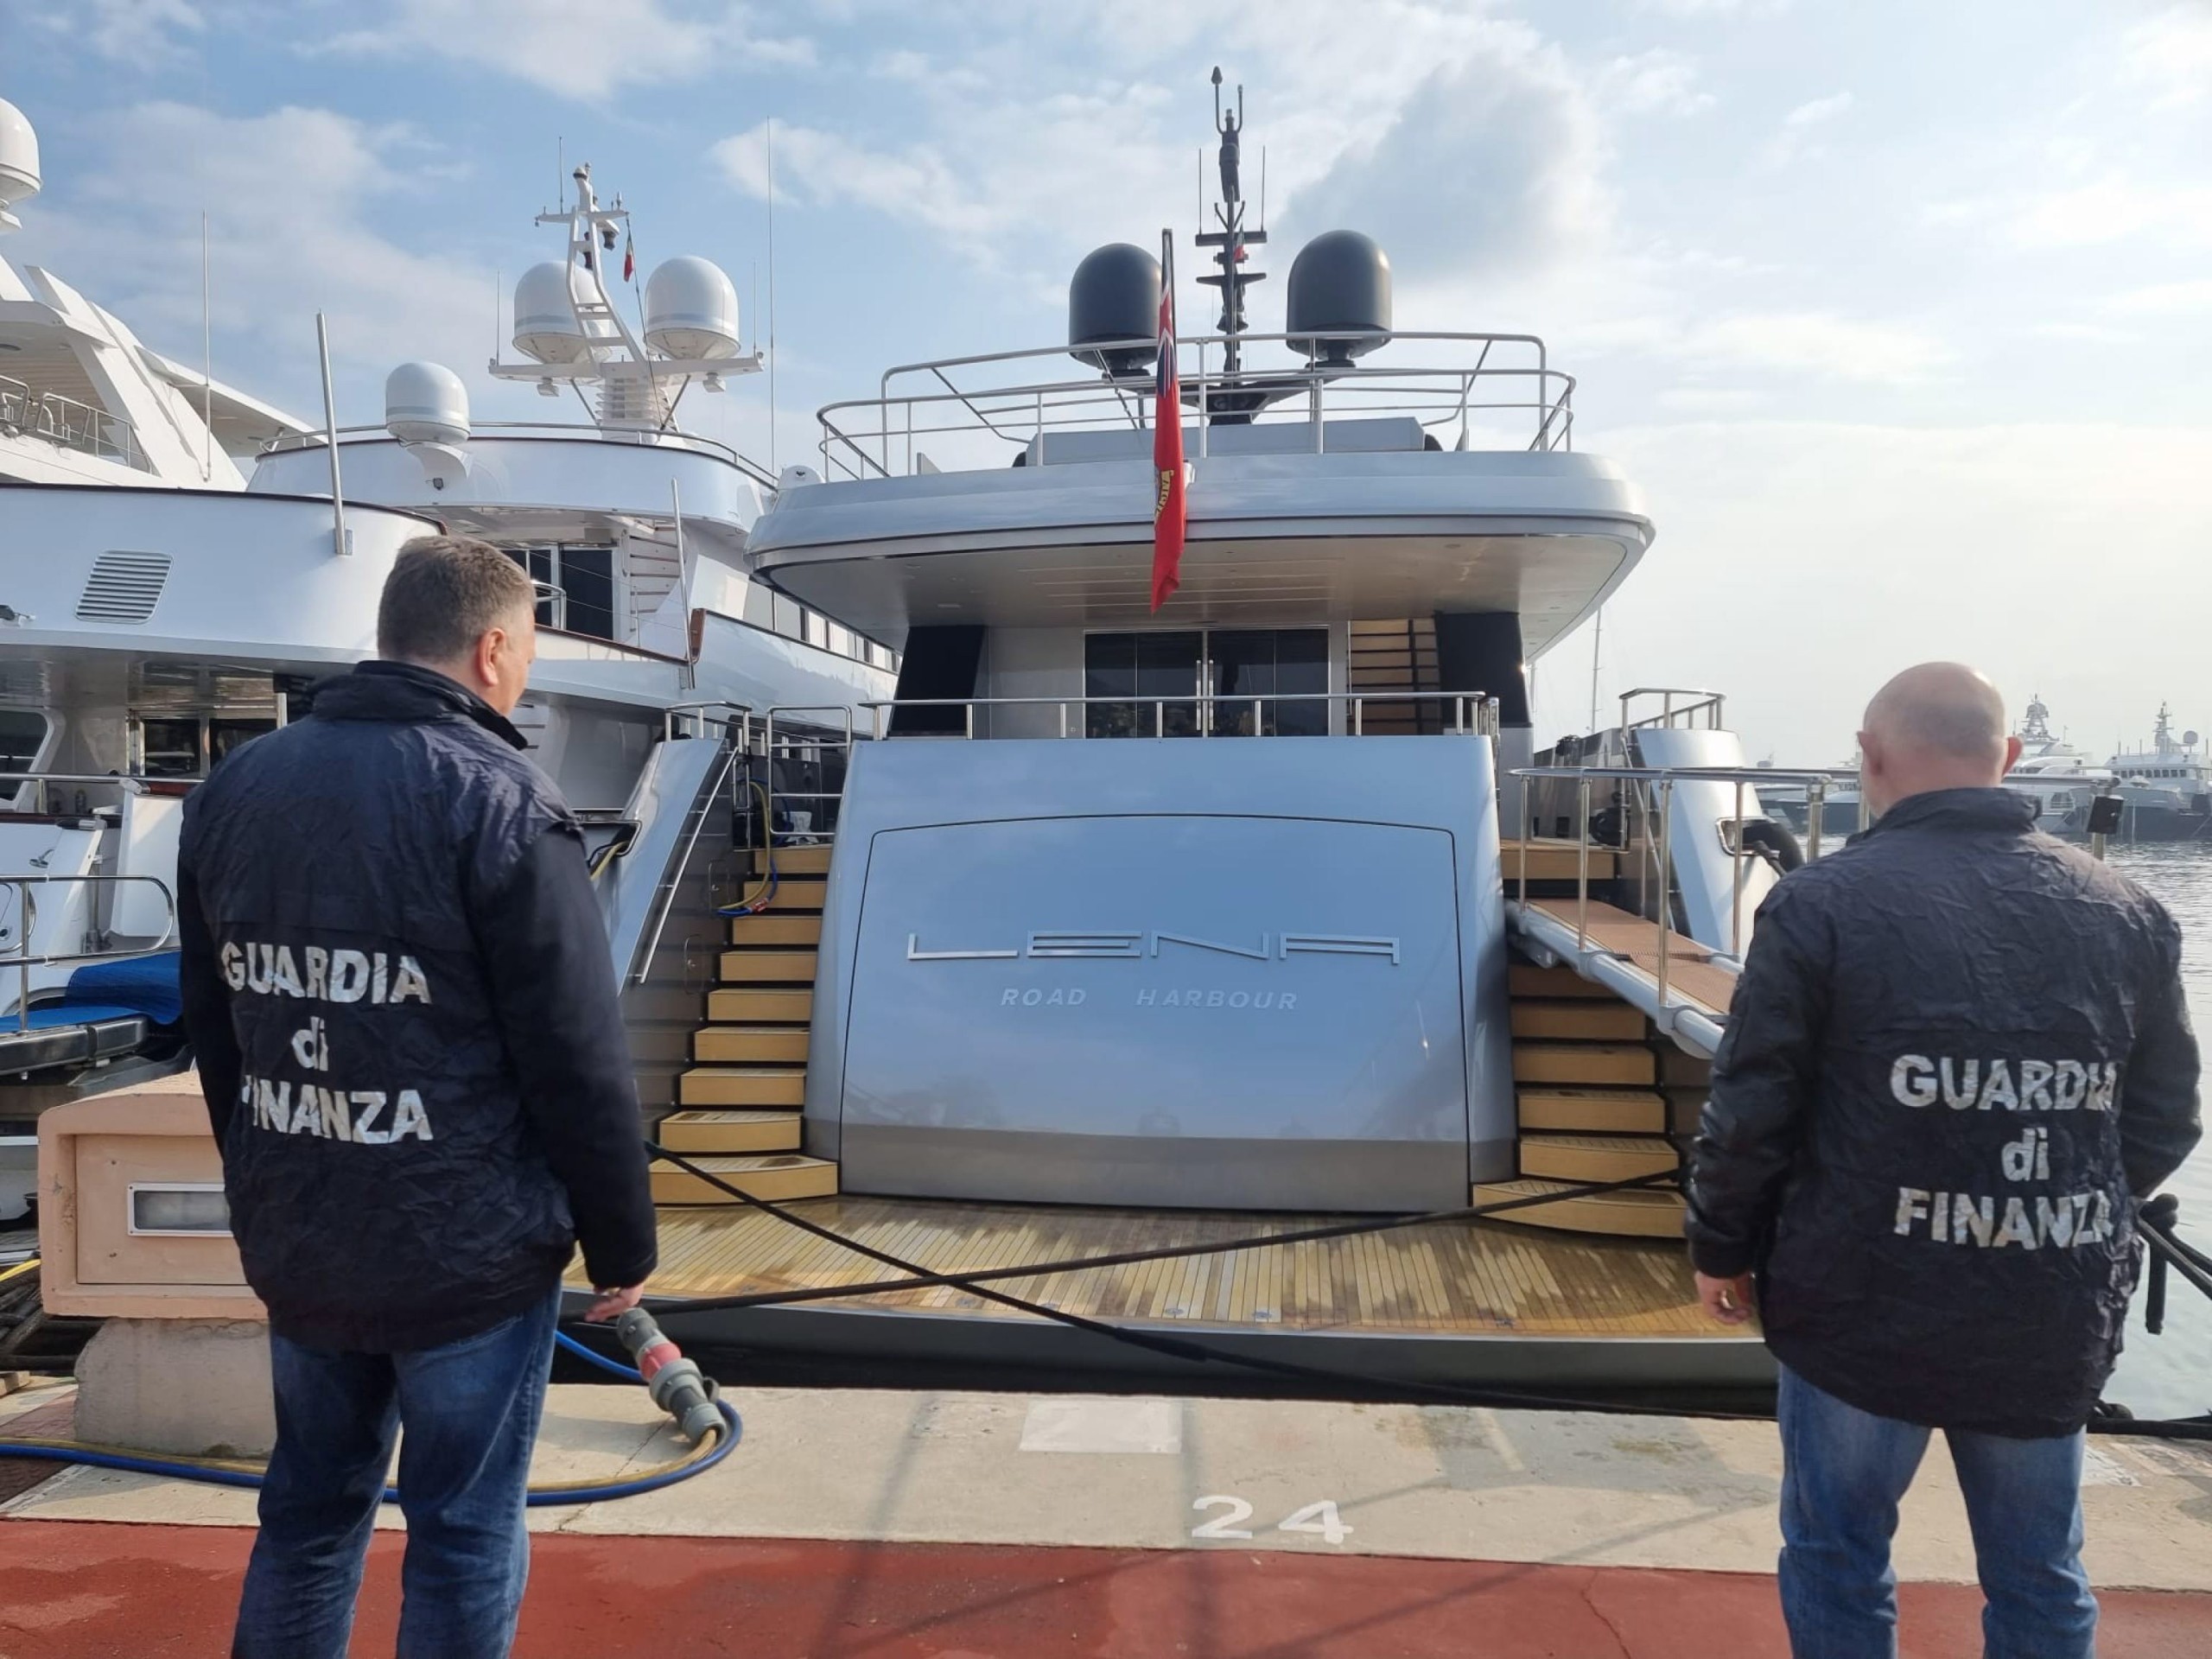 epa09803040 Guardia di Finanza (Italian finance police) officers look at seized maxi yacht 'Lena' in the port of Sanremo, Italy, 05 March 2022. The 52-meter boat with an estimated value of 50 million dollars, is owned by the Russian energy and infrastructure magnate Gennady Timchenko, owner of Volga Group and partner of Novatek. Along with other Russian oligarchs, Timchenko's assets were frozen by the EU on 28 February in response to Russia invading the Ukraine.  EPA/Fabrizio Tenerelli